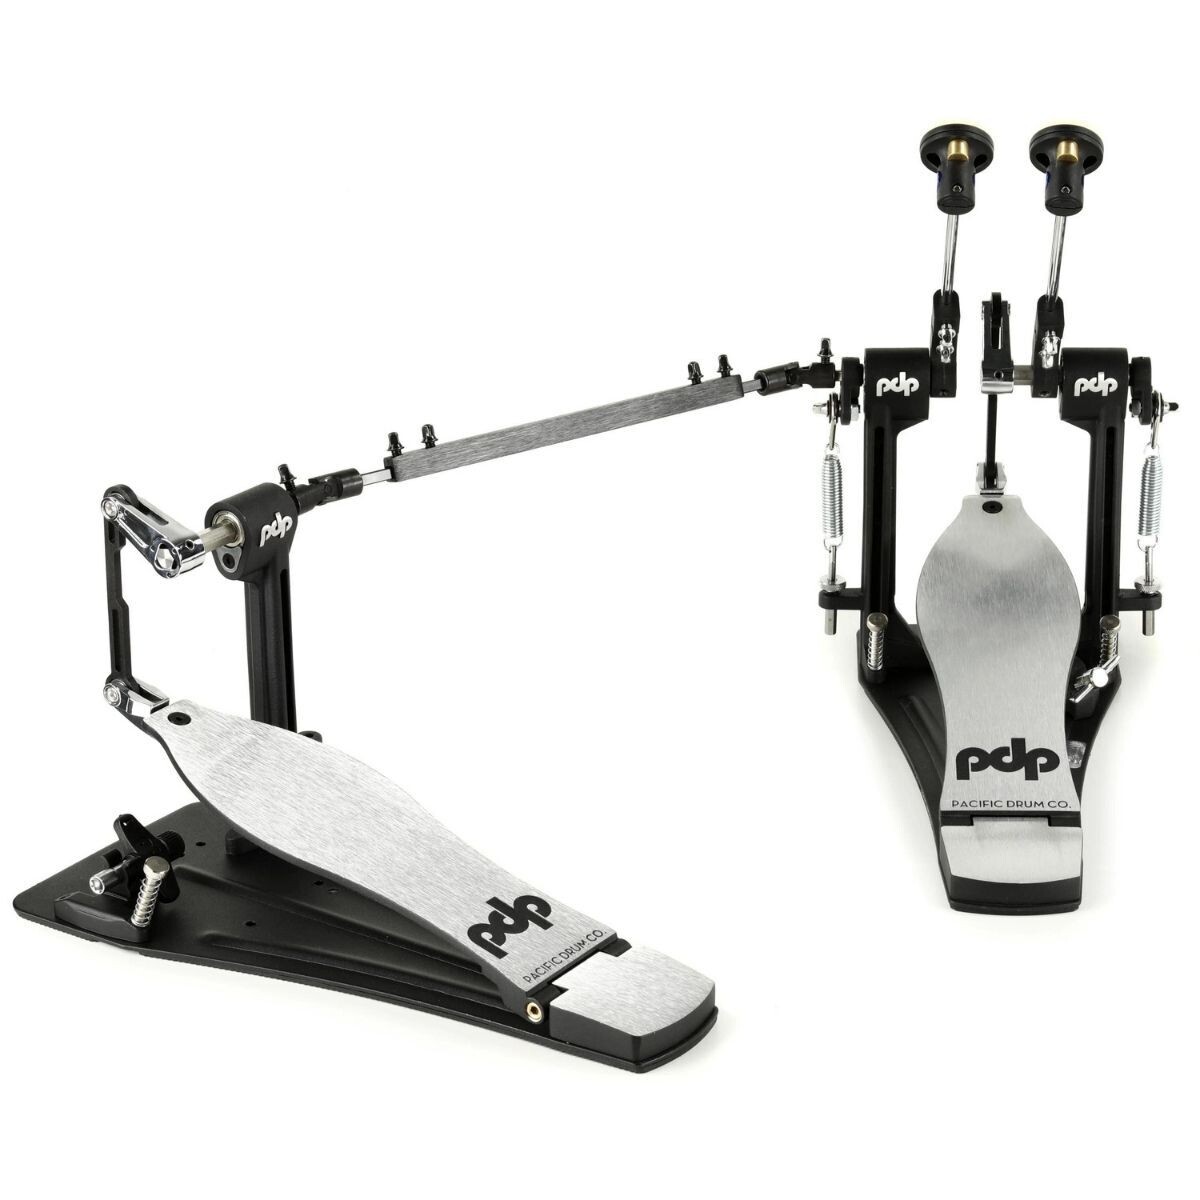 PDP Concept Series Direct Double Pedal PDDPCO